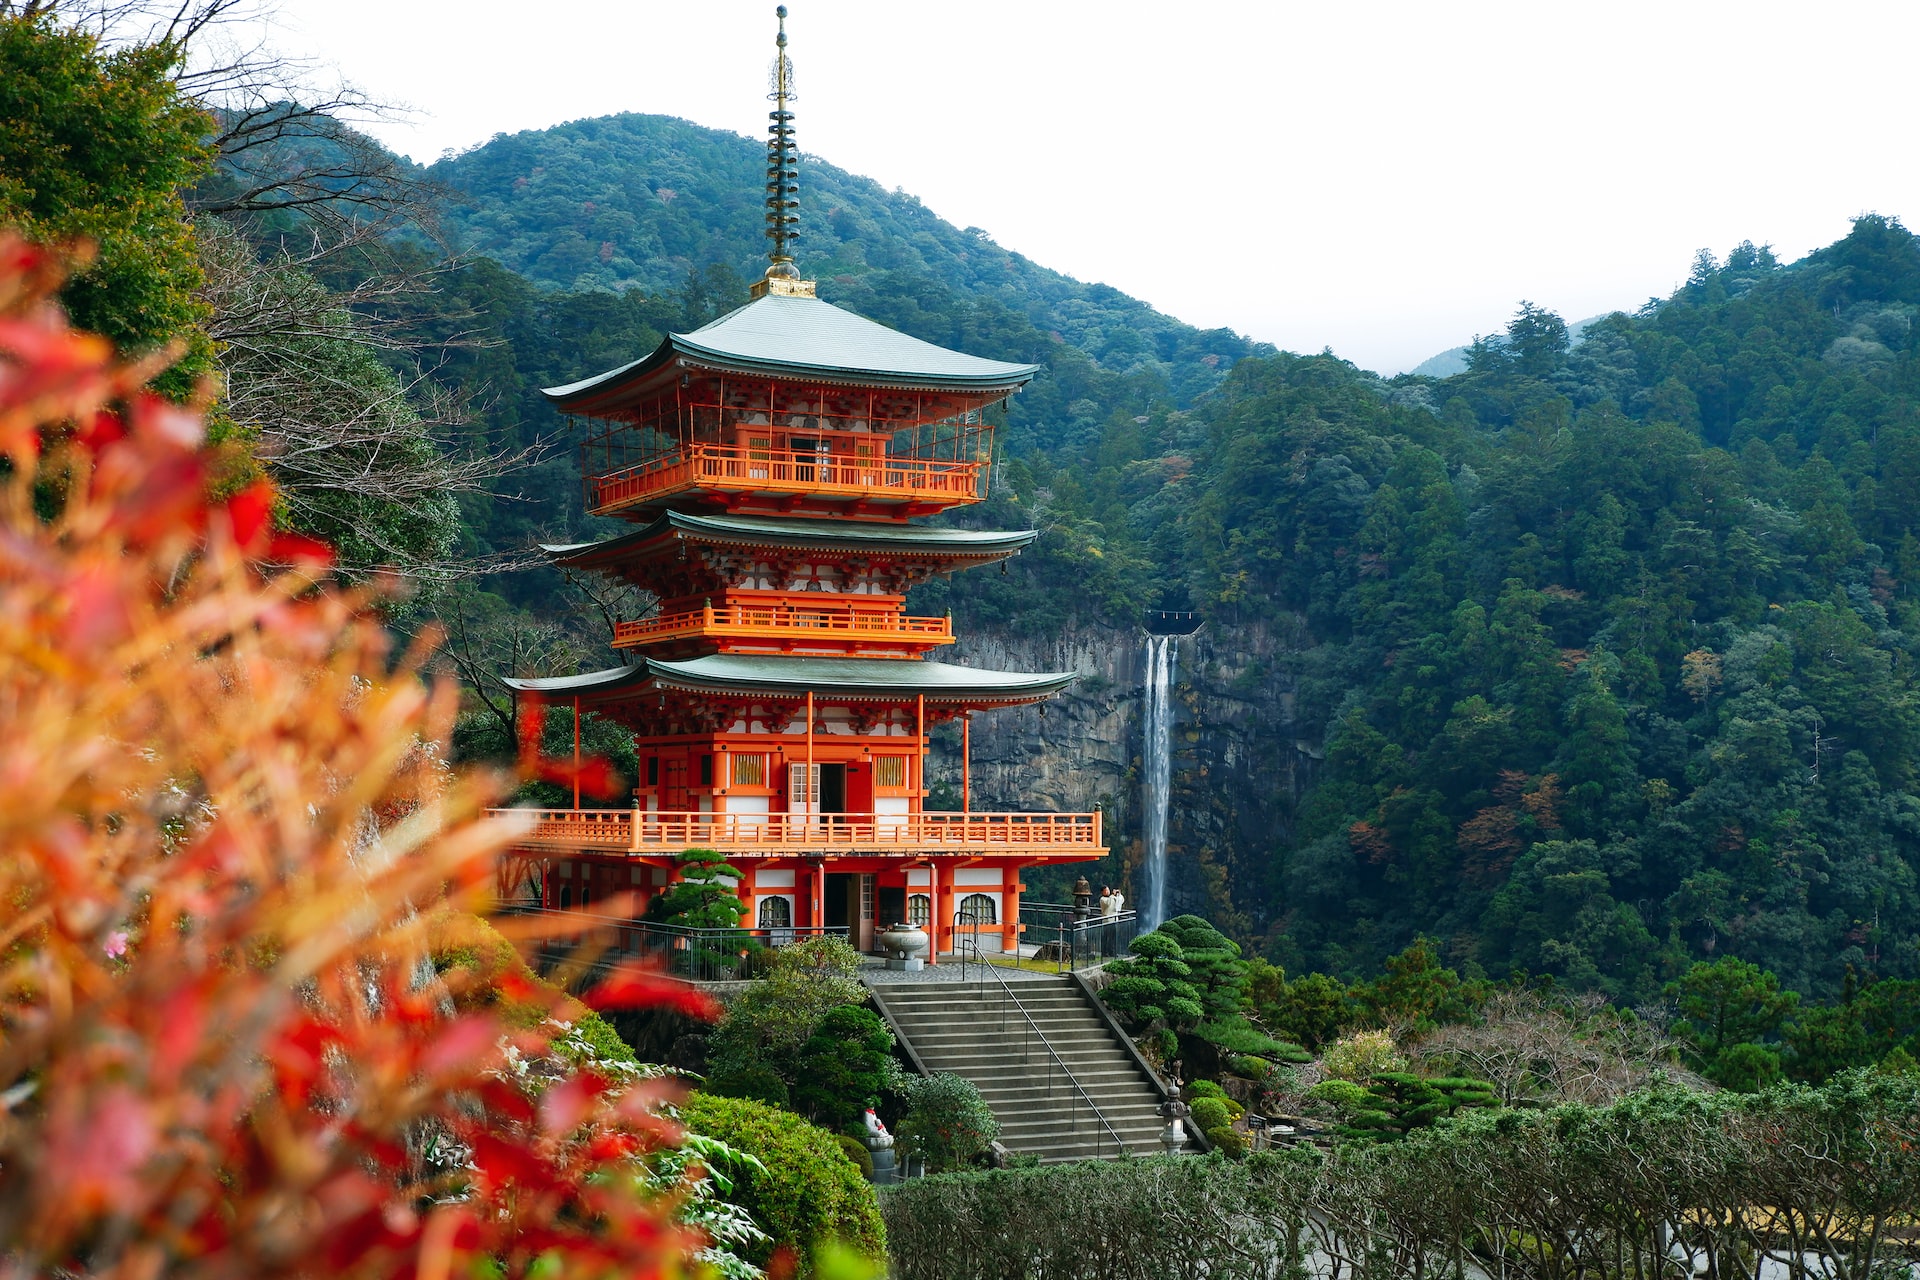 A photo of a vermillion three-tiered pagoda at the Kumano Nachi Waterfall in Japan